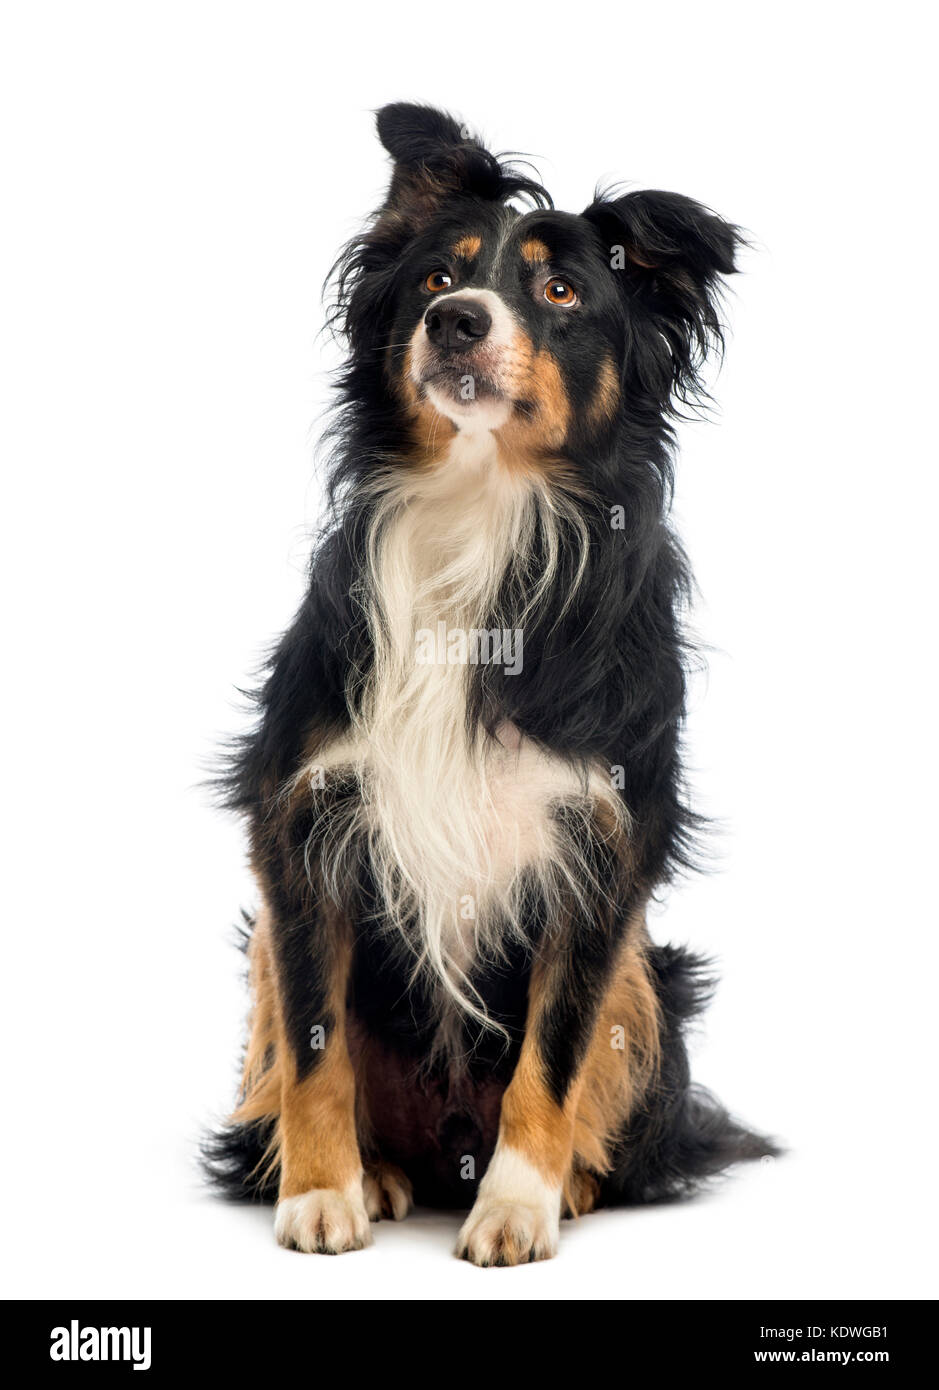 Border Collie, 8.5 years old, sitting and looking up in front of white background Stock Photo